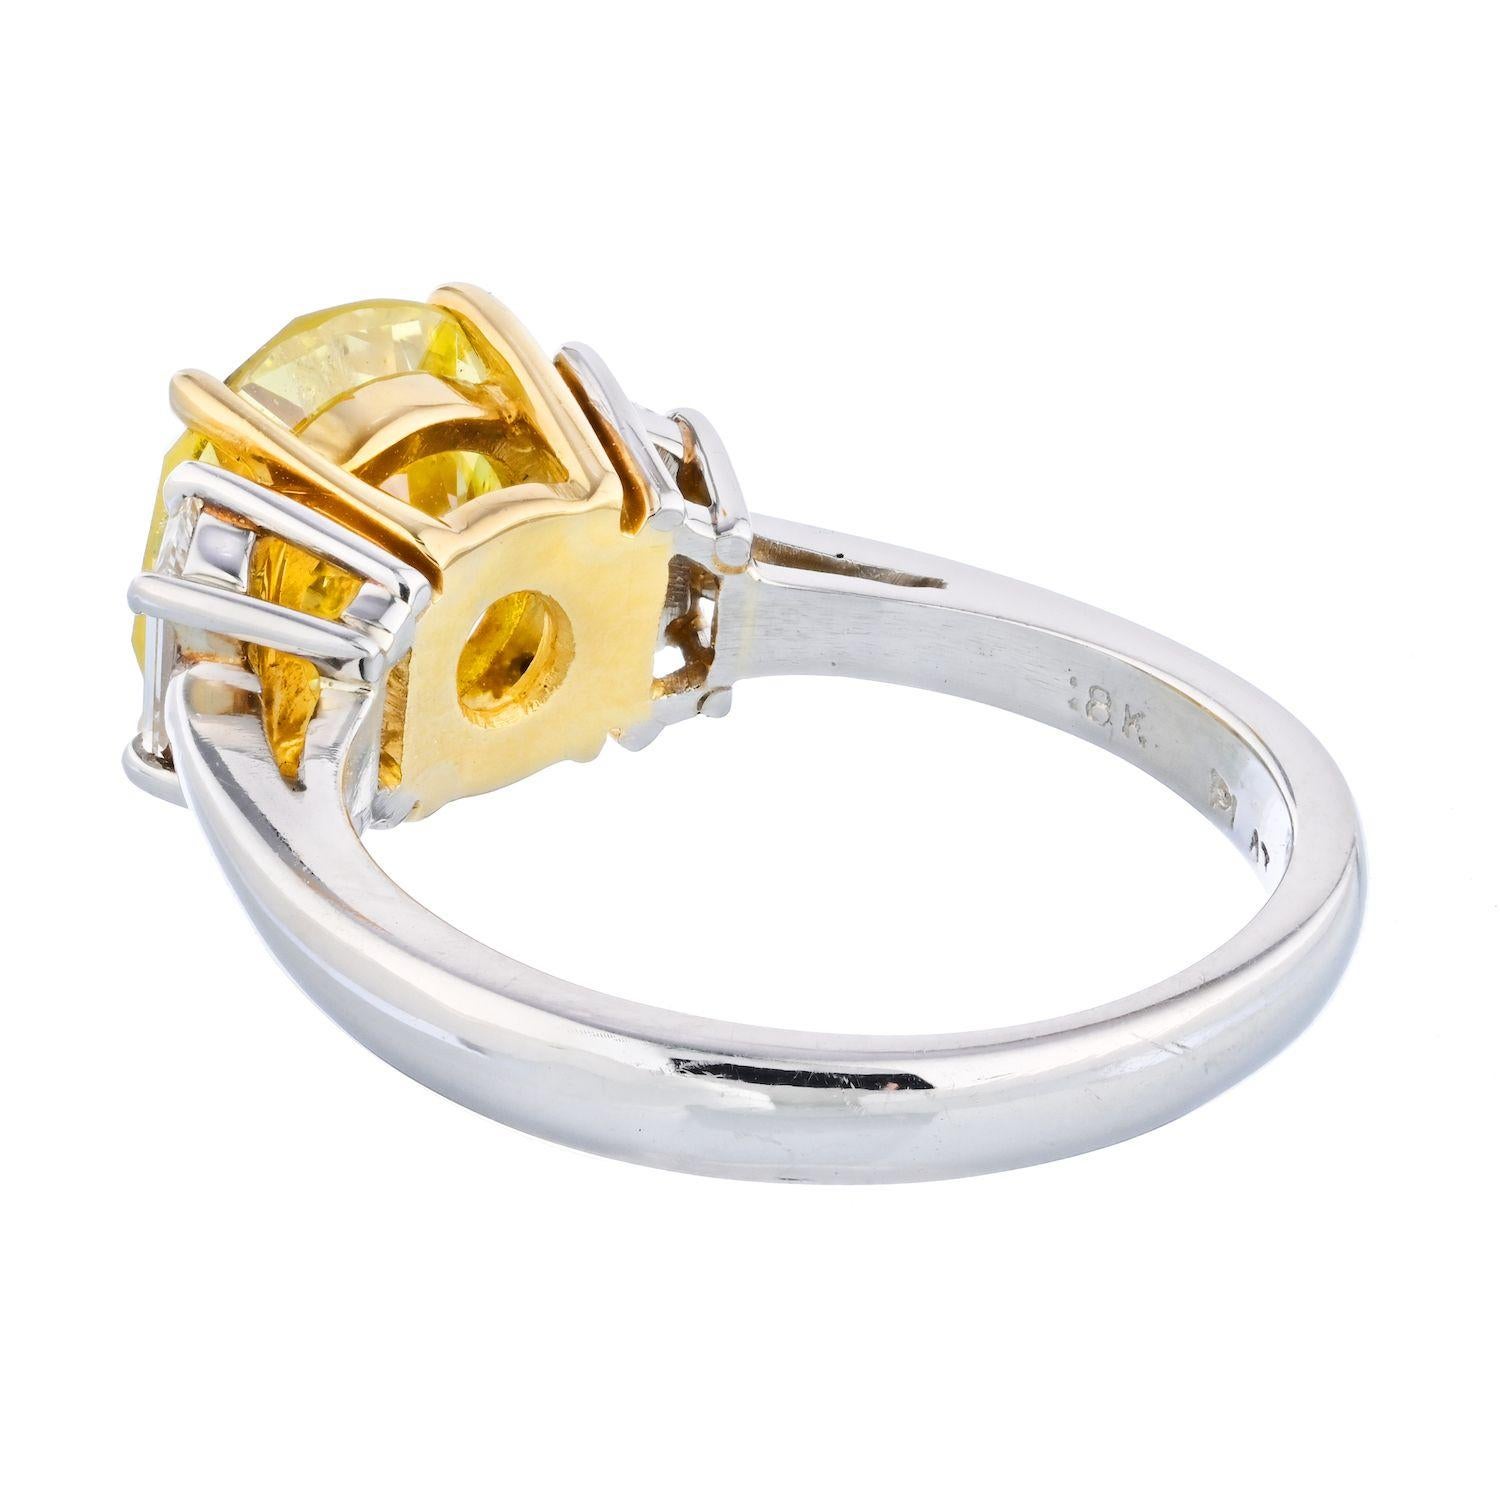 This is a very unique three stone diamond engagement ring crafted in Platinum and 18k yellow gold mounted with a fine round brilliant cut diamond: it is a 2.90 carat round brilliant cut that is graded by GIA as a Fancy Intense Yellow. It is flanked